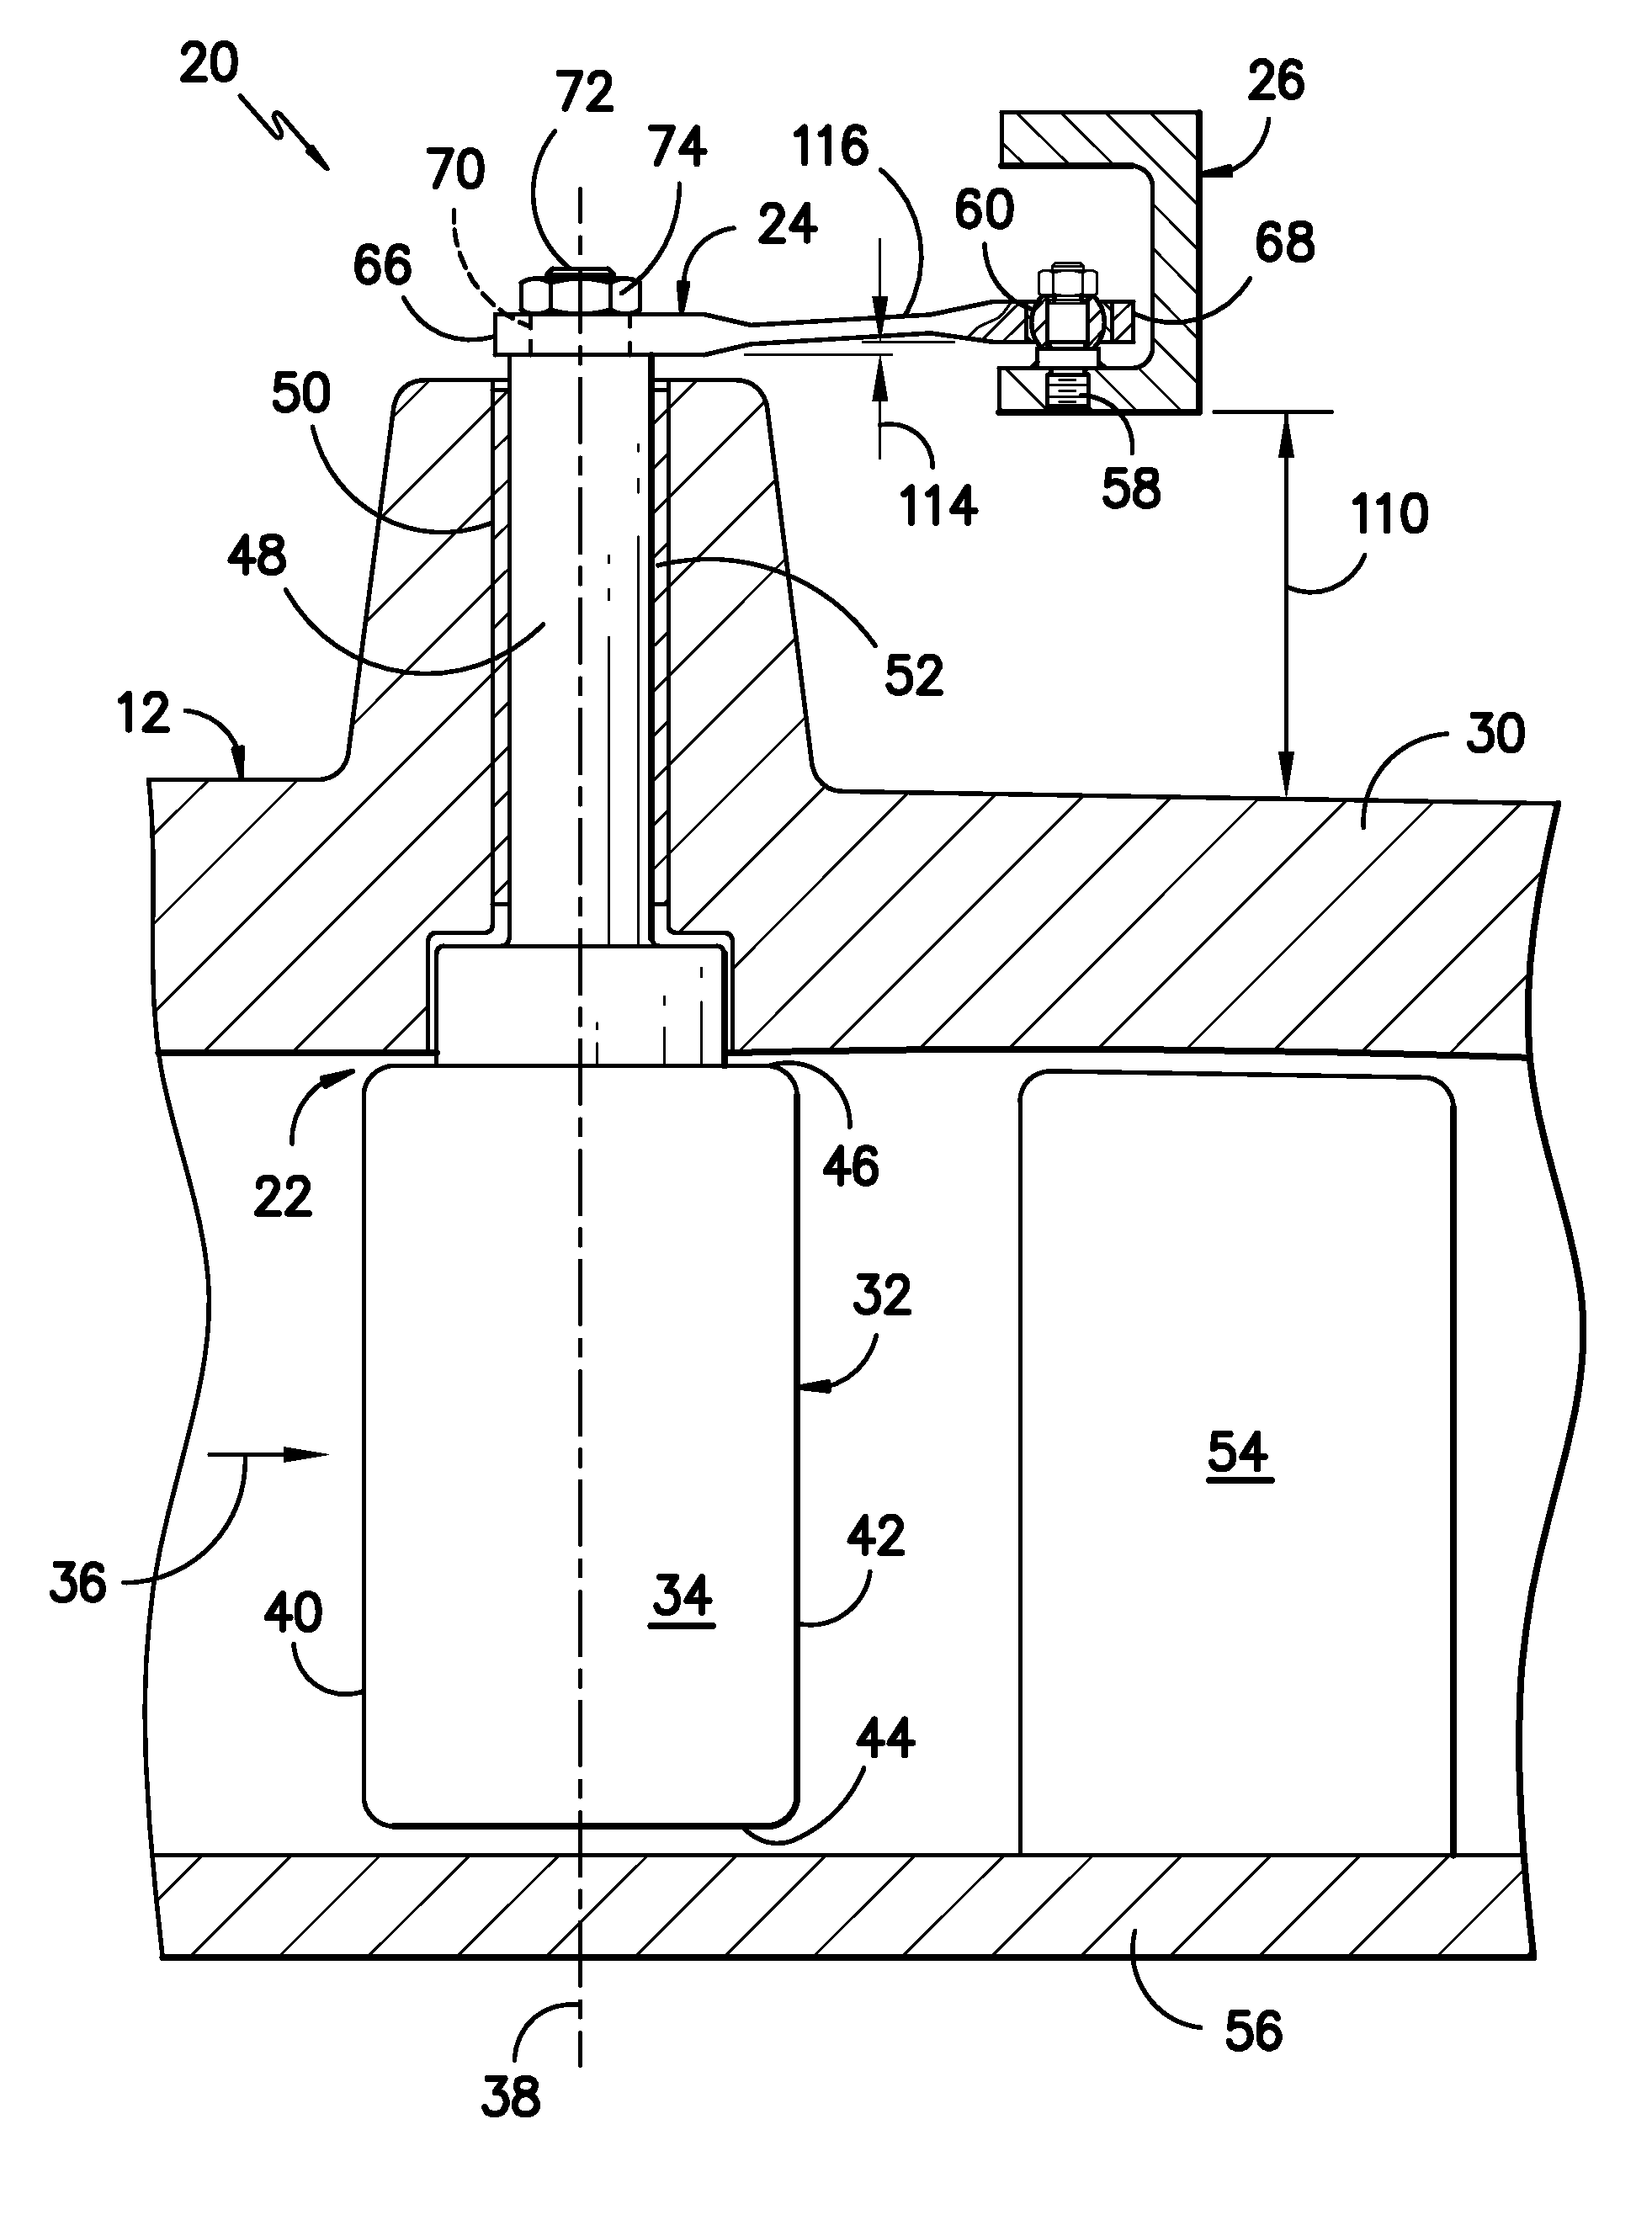 Attachment stud for a variable vane assembly of a turbine compressor